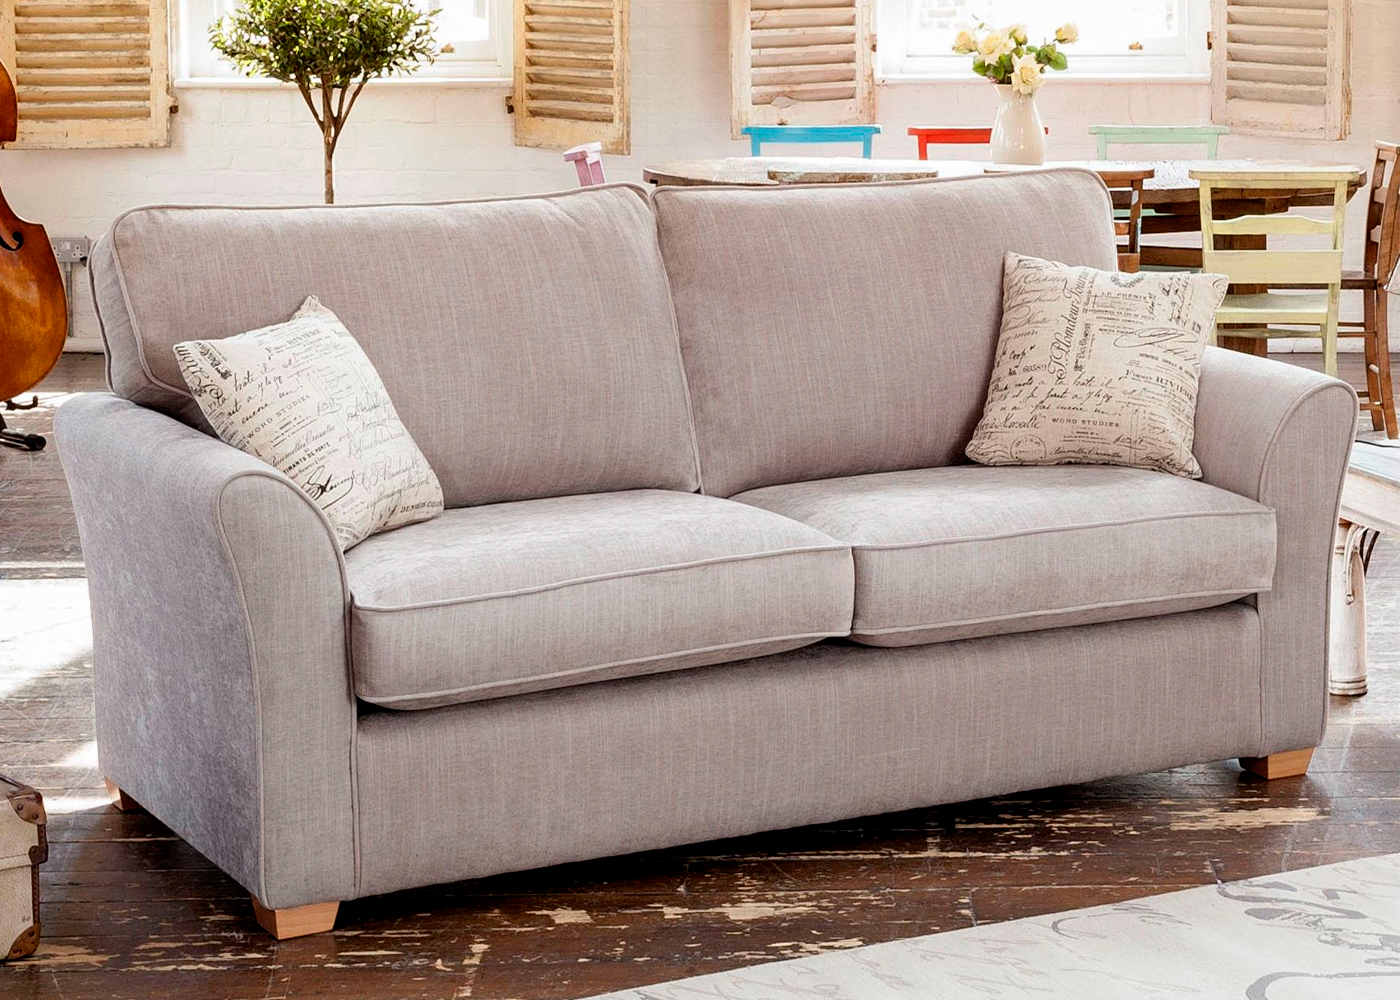 Alstons Padstow 3 seater sofa bed 1 - Midfurn Furniture ...